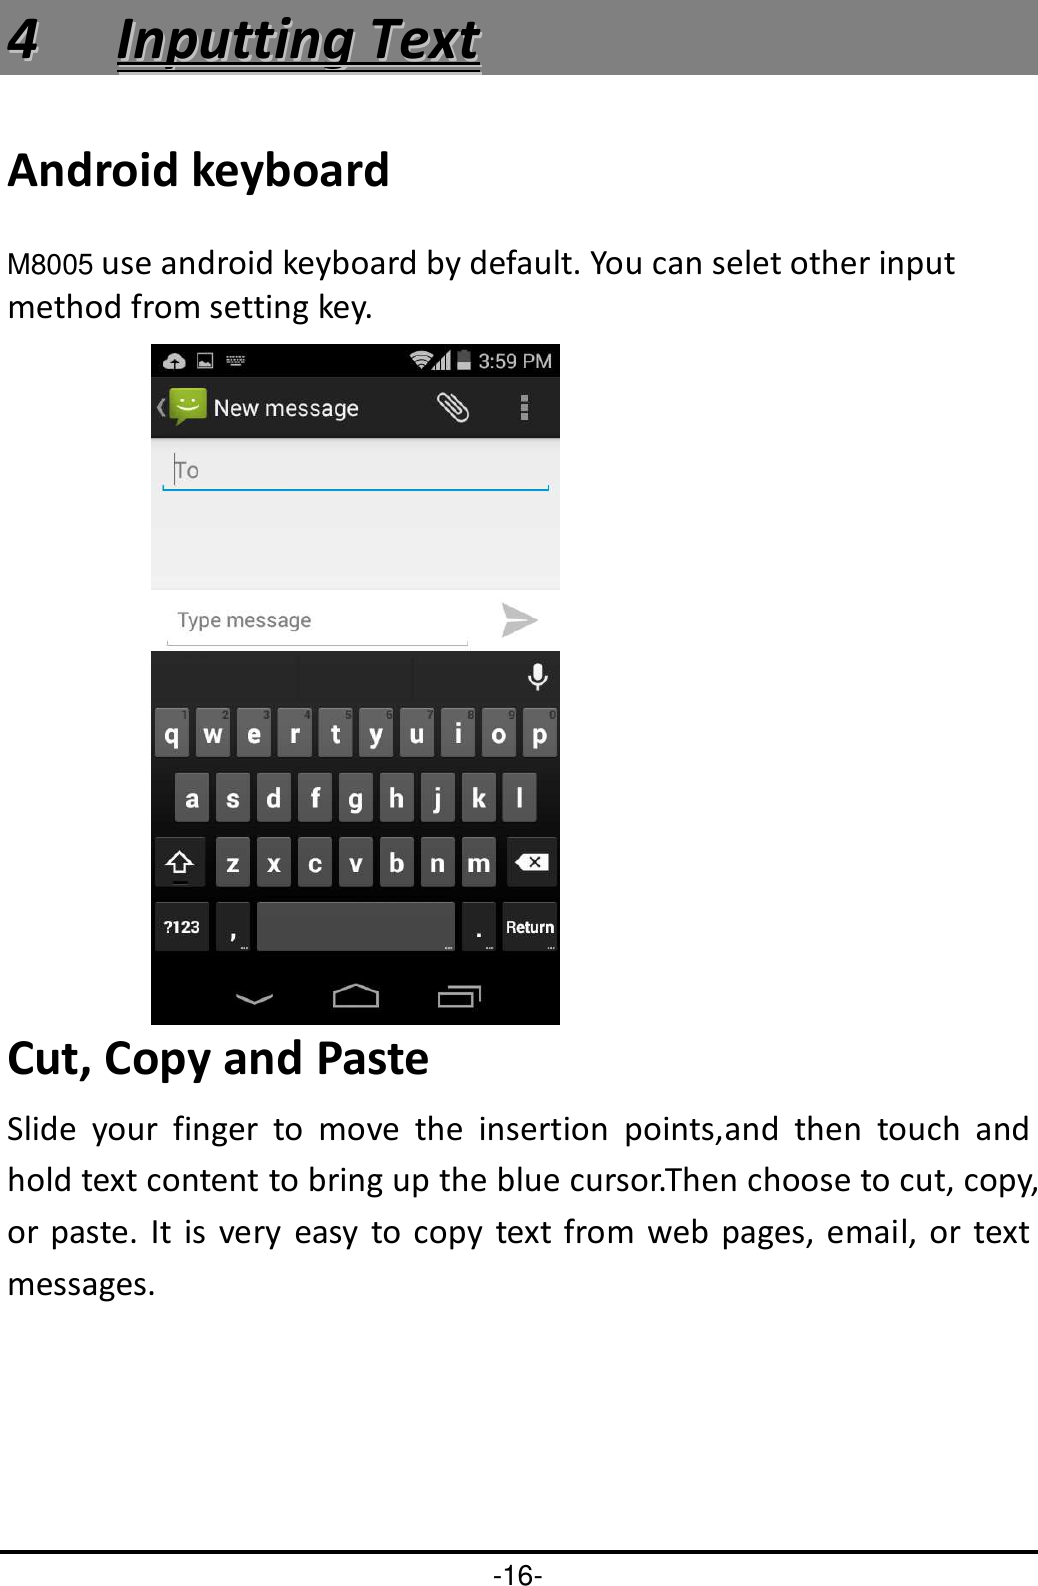 -16- 44  IInnppuuttttiinngg  TTeexxtt  Android keyboard M8005 use android keyboard by default. You can selet other input method from setting key.  Cut, Copy and Paste Slide  your  finger  to  move  the  insertion  points,and  then  touch  and hold text content to bring up the blue cursor.Then choose to cut, copy, or paste. It is  very  easy  to  copy  text from web pages,  email, or text messages. 